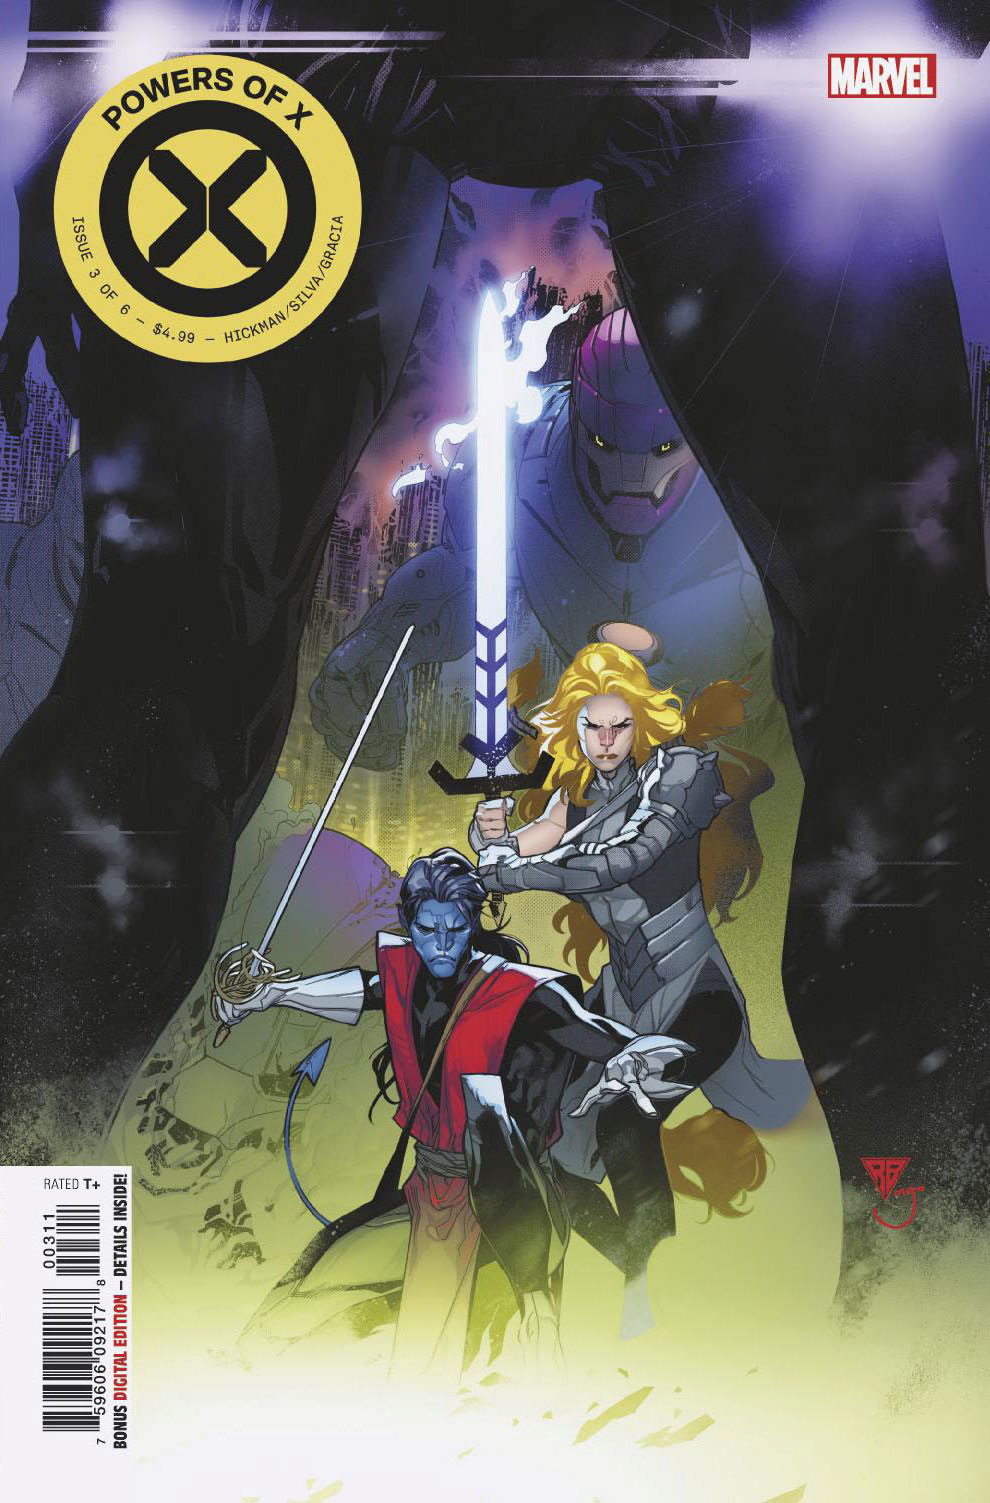 Powers of X no. 3 (3 of 6) (2019 Series)